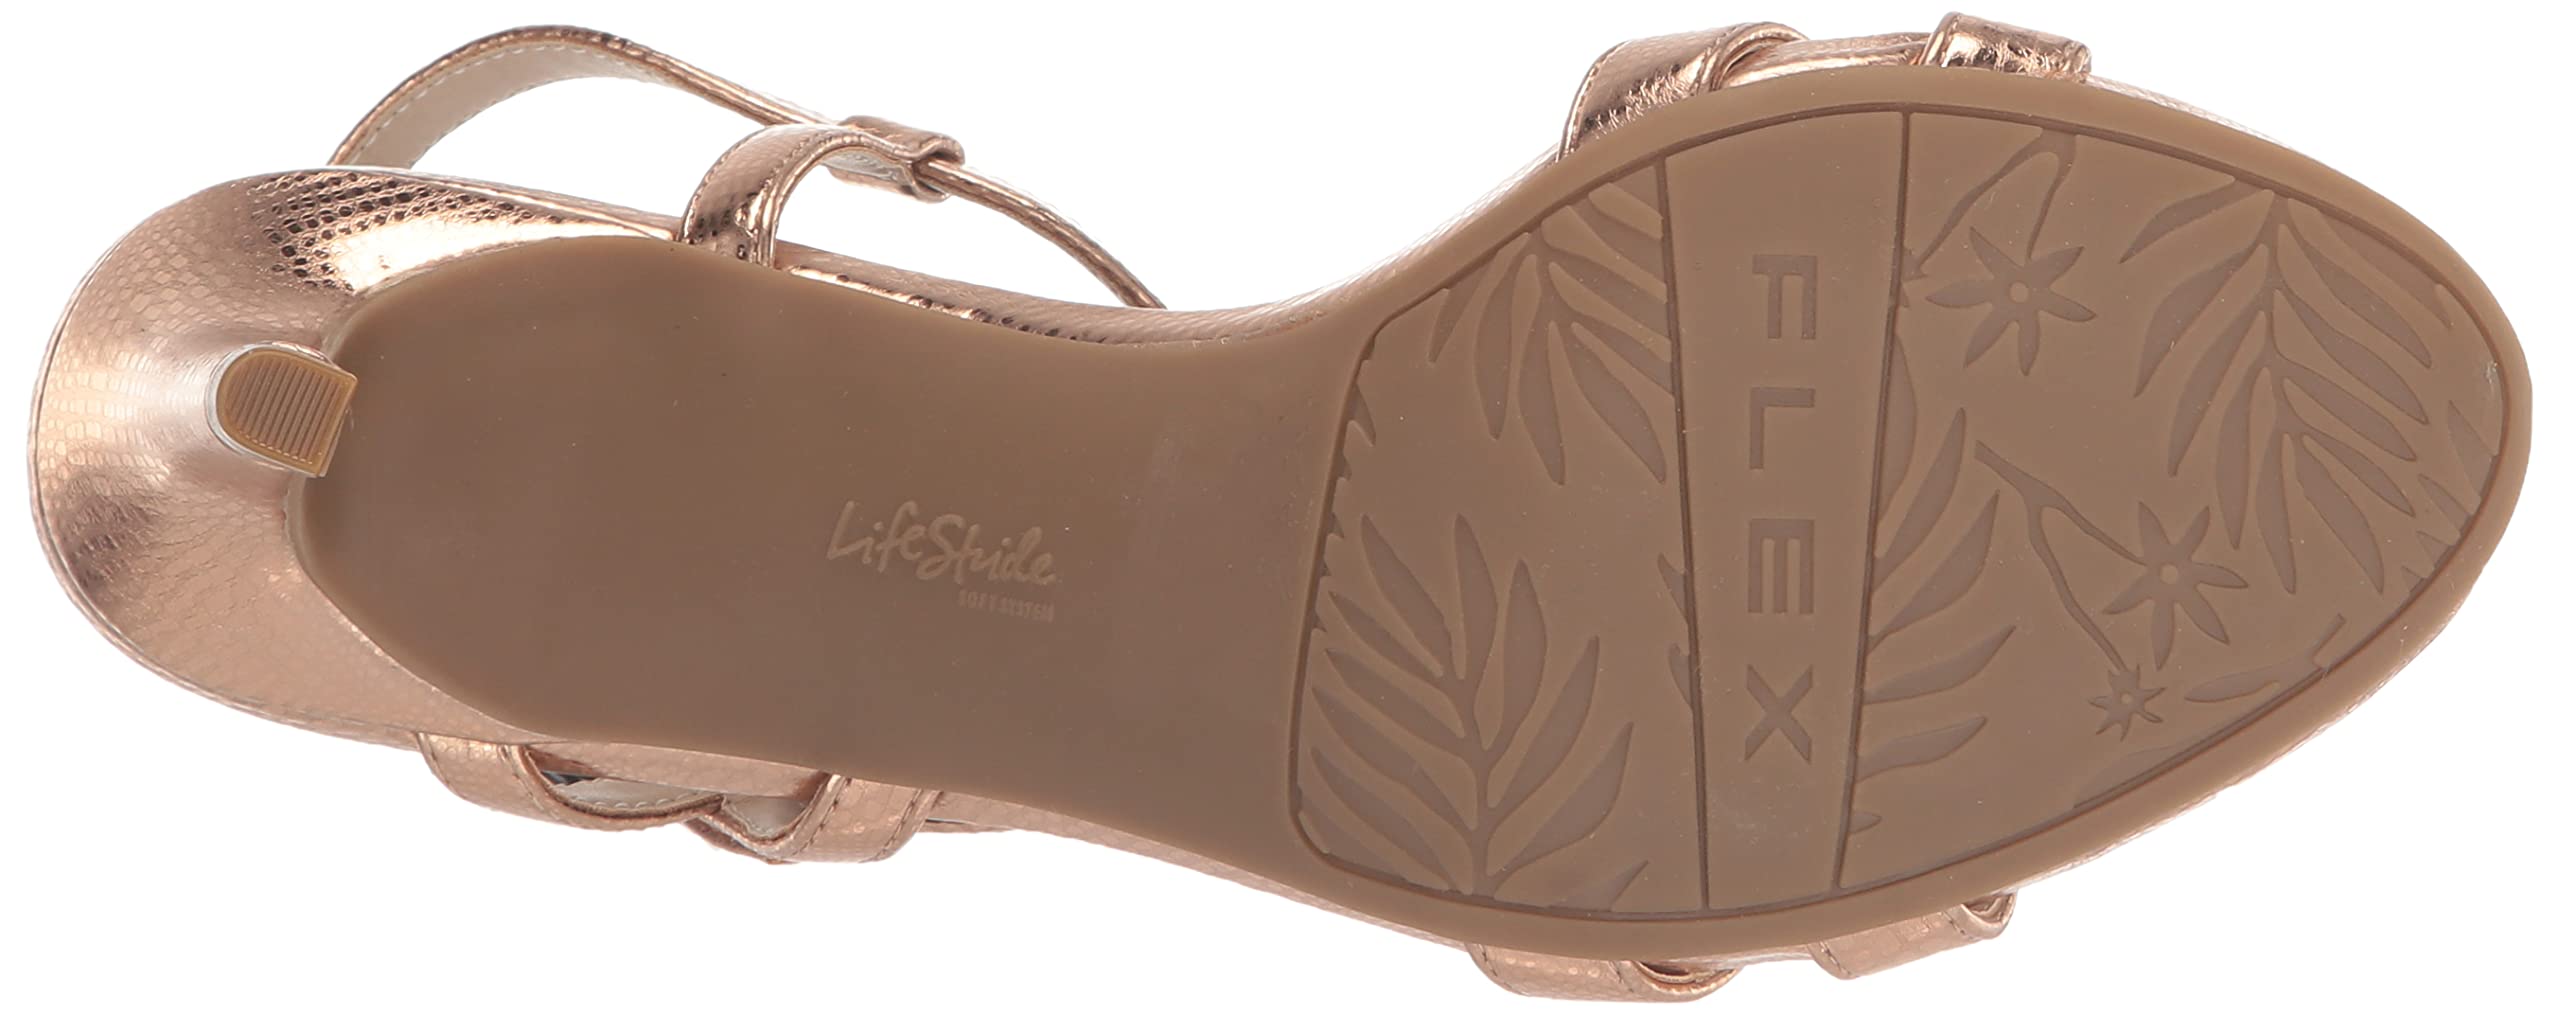 LifeStride Women's Miracle Strappy Heeled Sandal